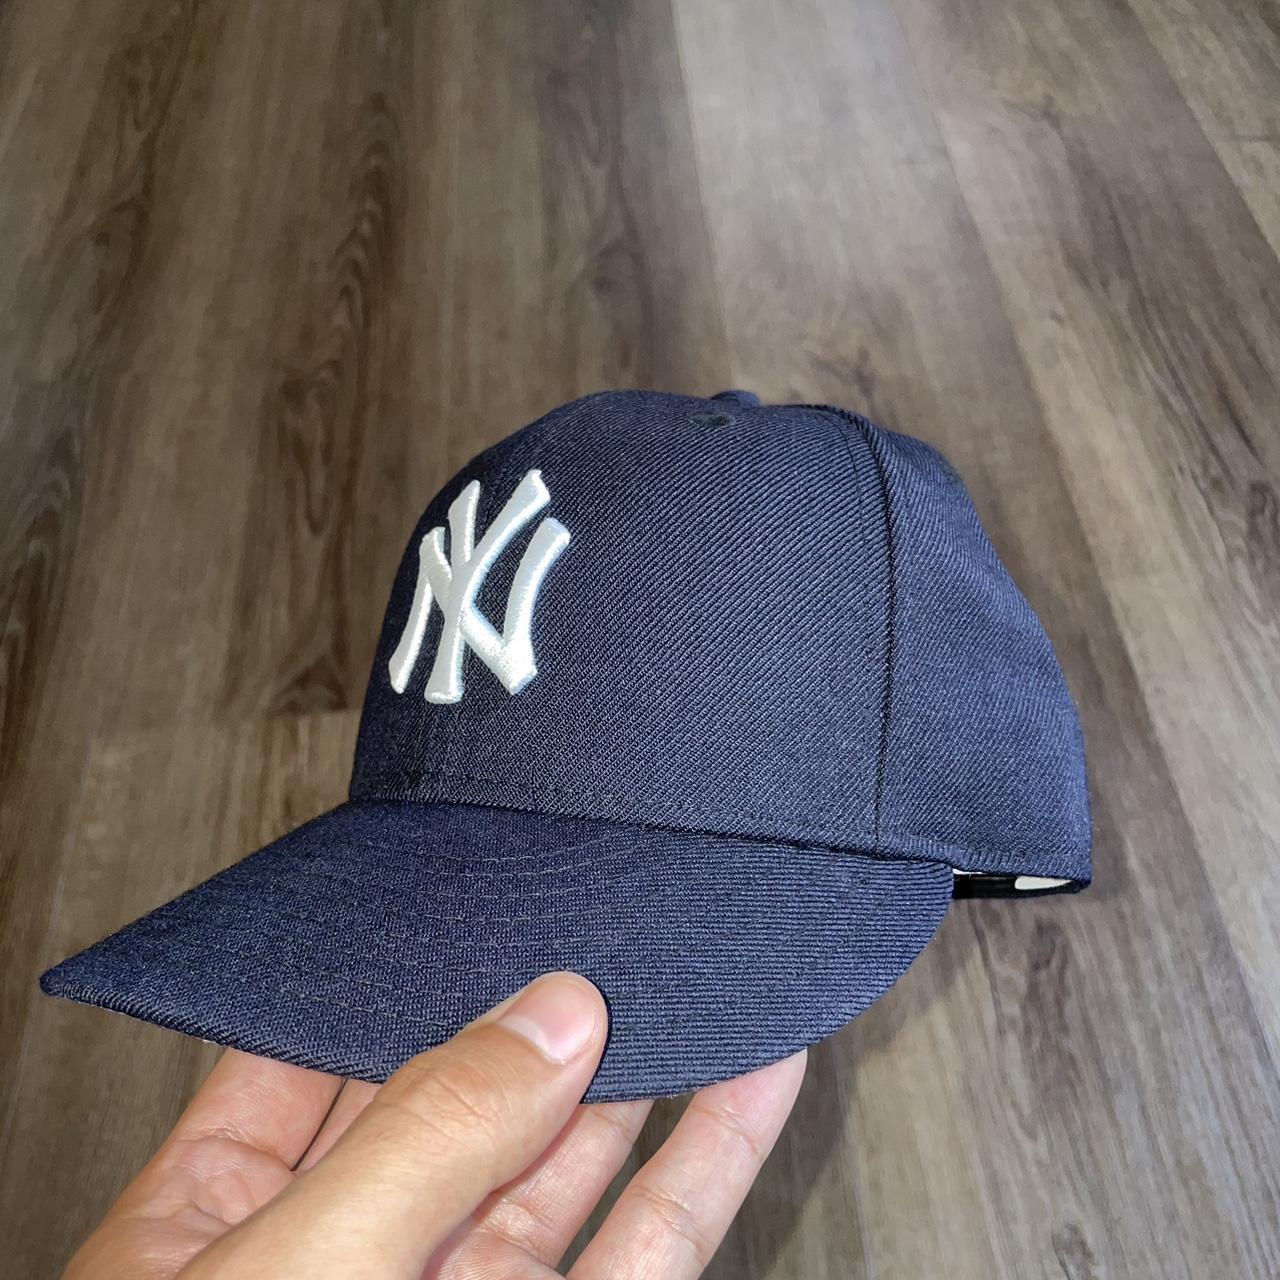 Yankees Fitted Hat for sale! Worn once or twice and... - Depop